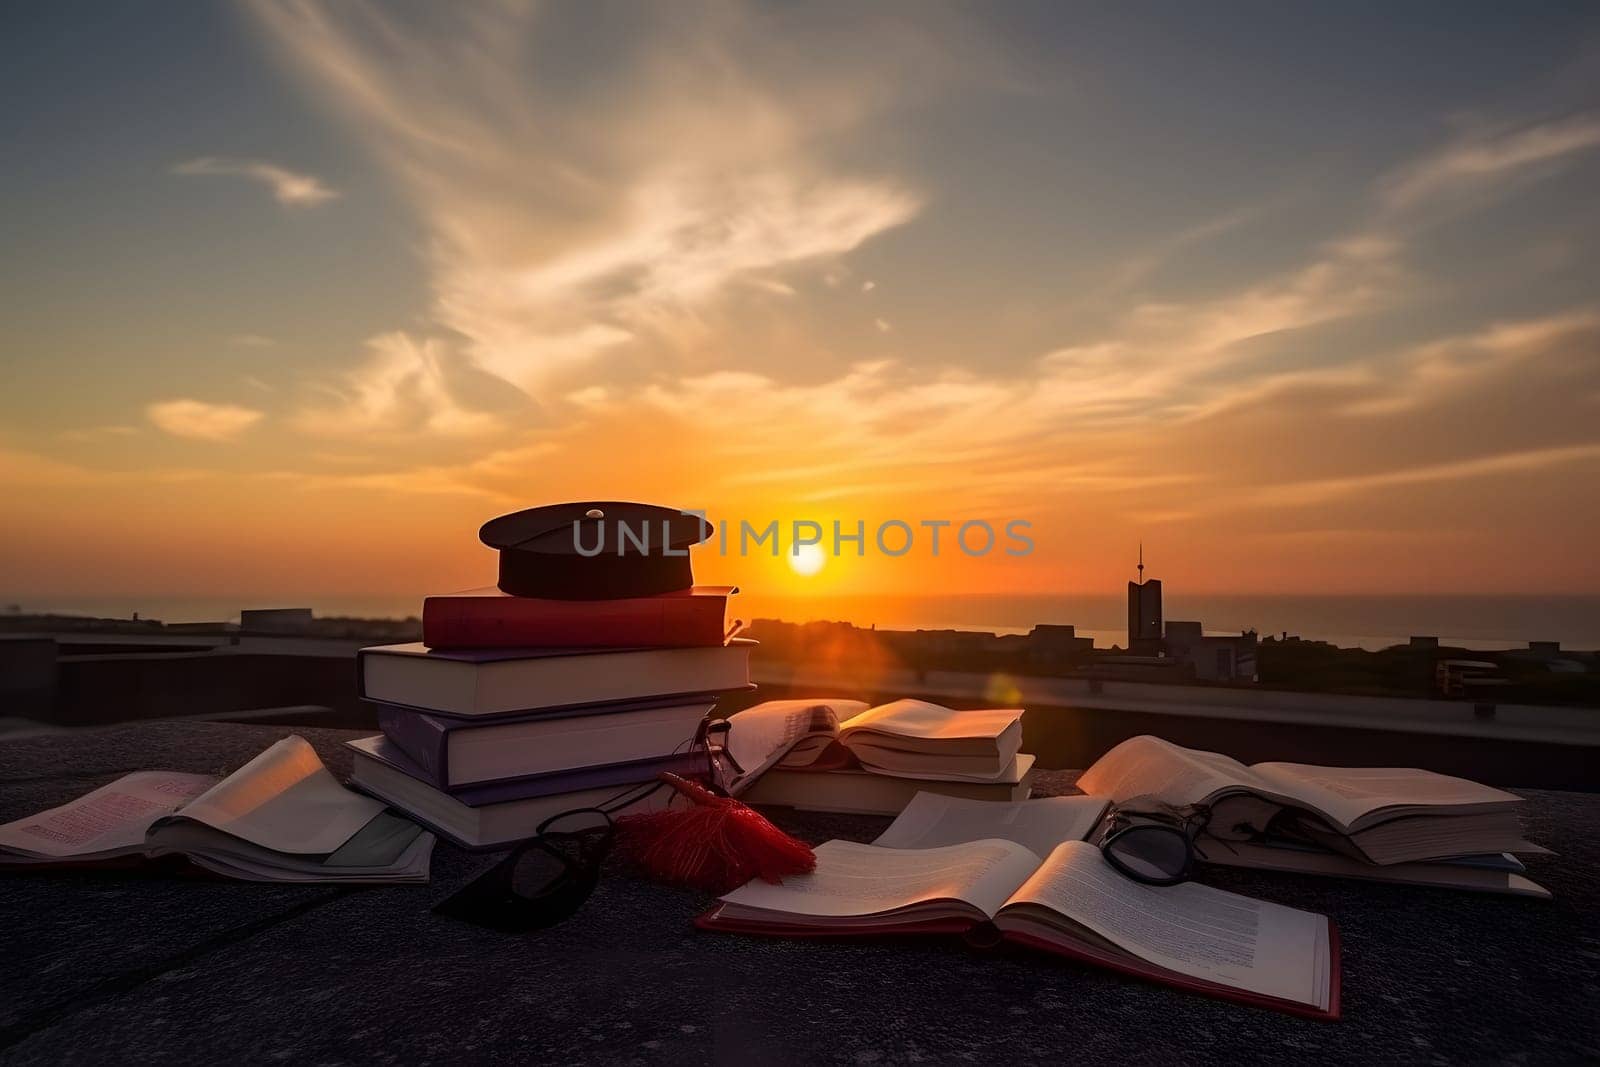 a stack of books and graduation cap on the roof with the sunset in the background, neural network generated image by z1b